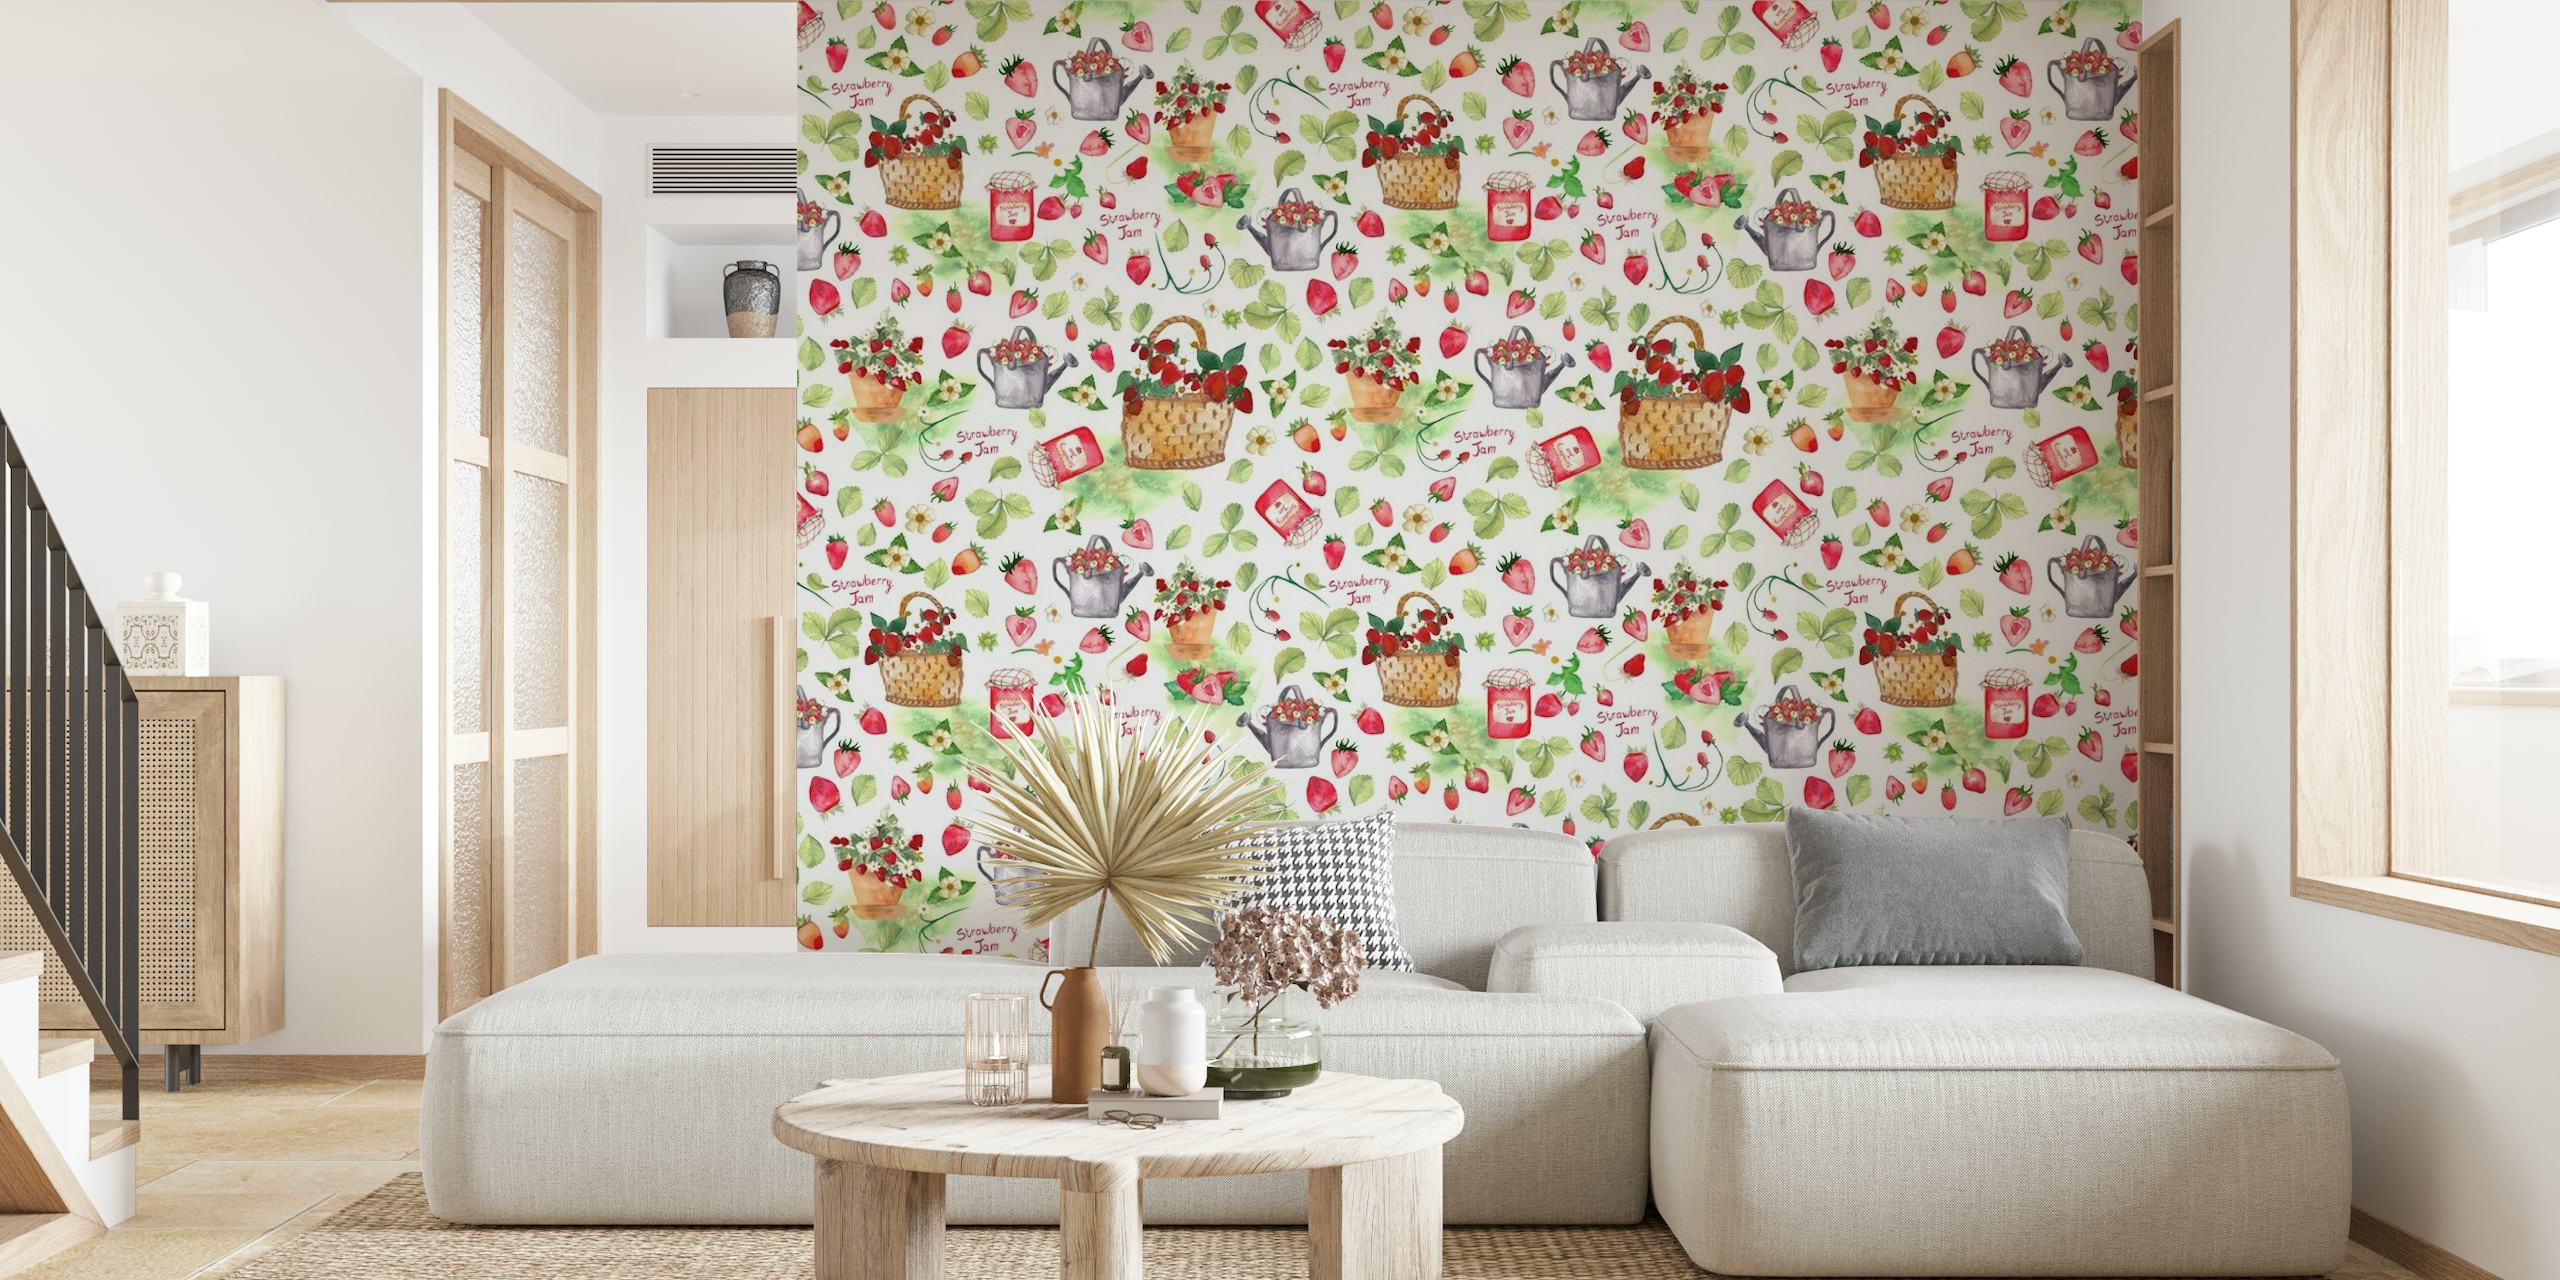 A cheerful and colorful Strawberries Meadow wall mural with red berries and flowers